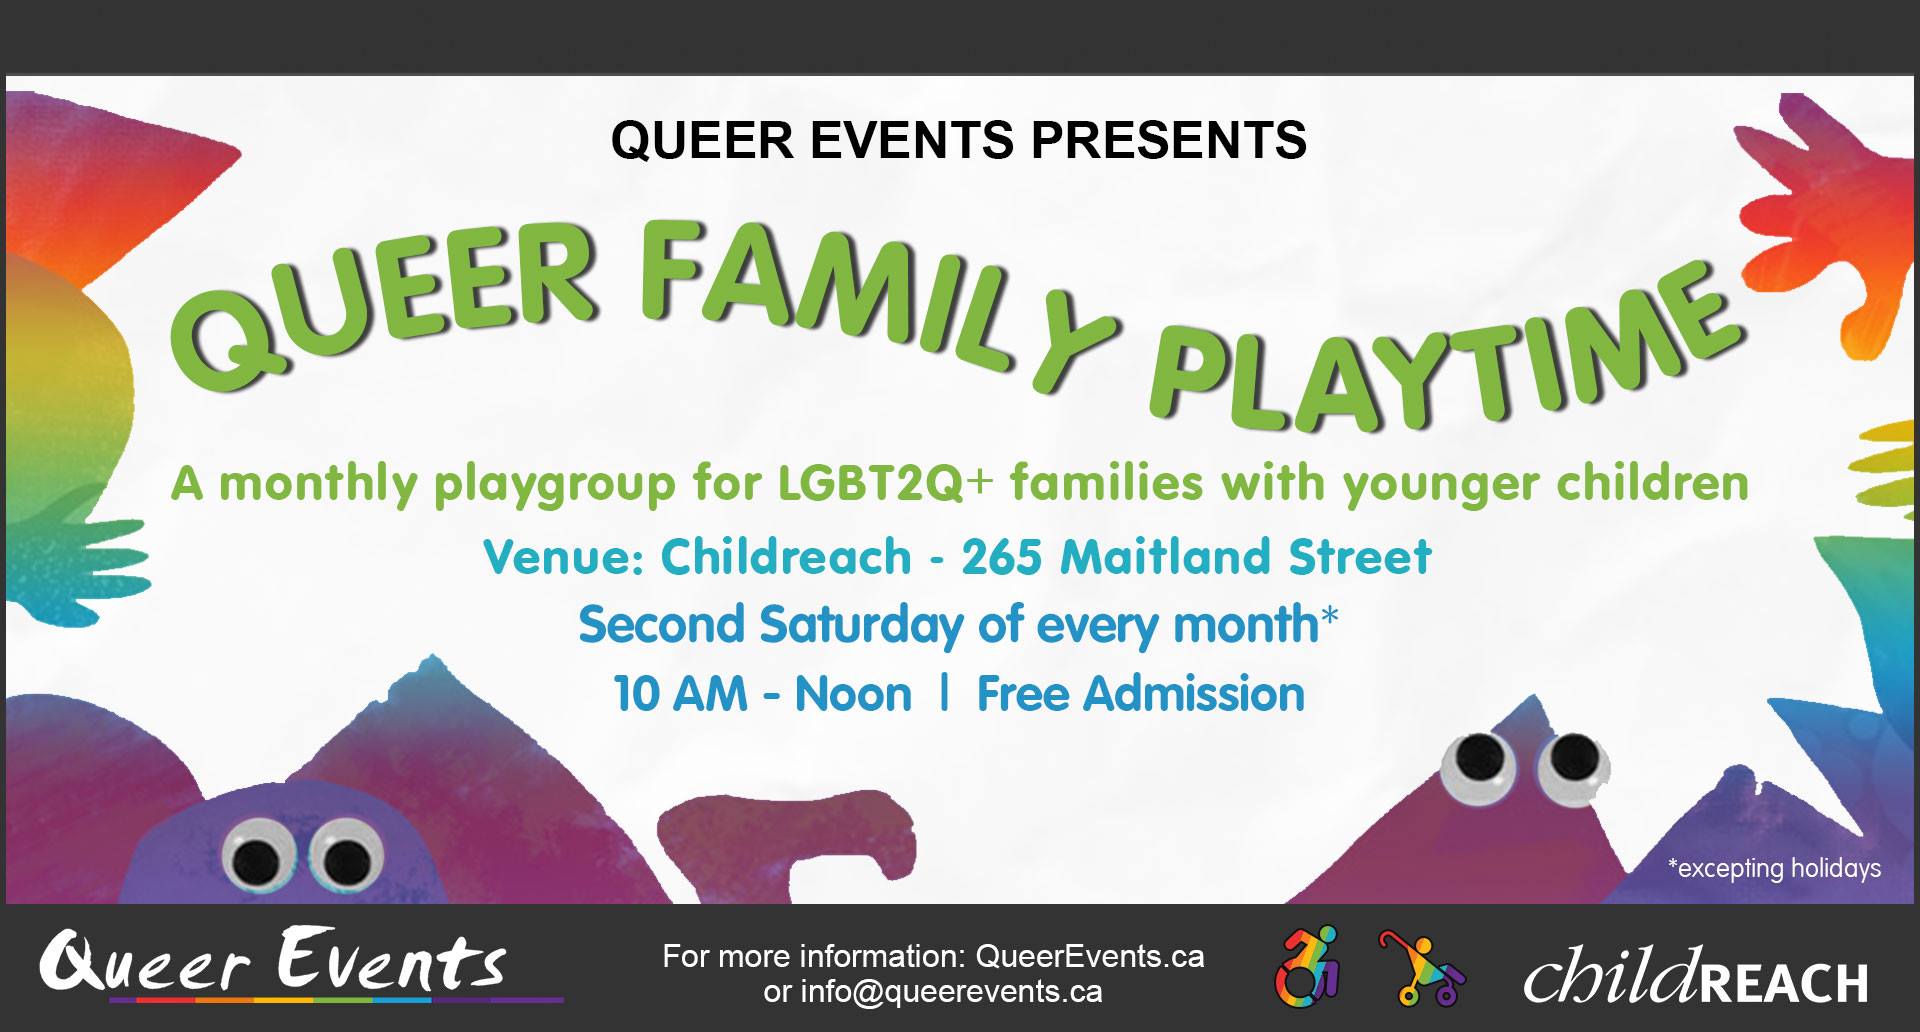 Queer Events presensts Queer Family Playtime